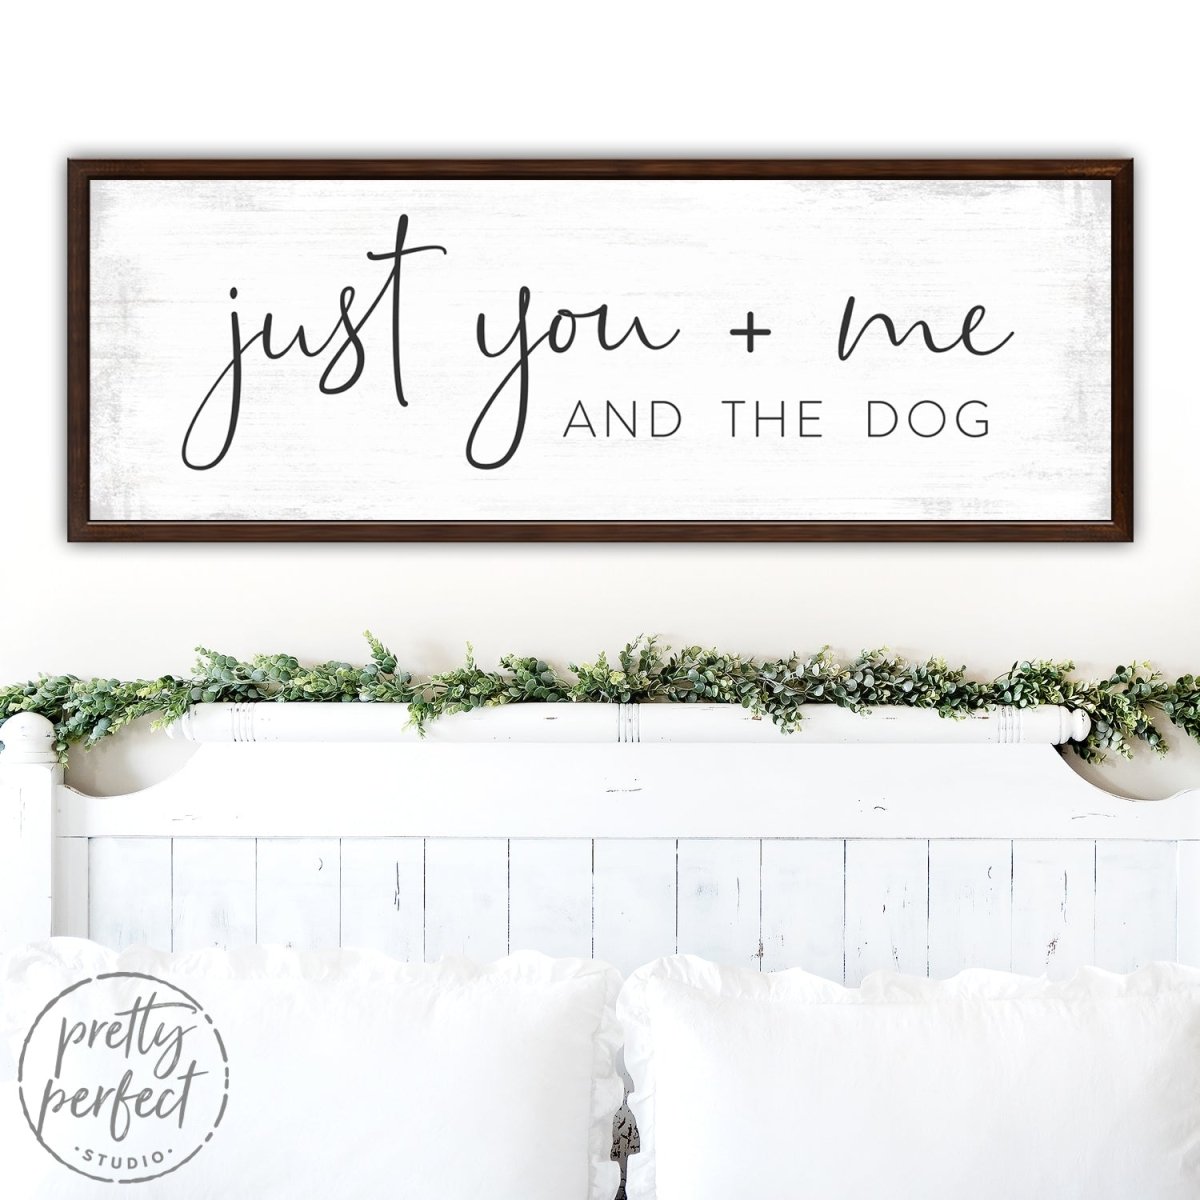 Just You And Me And The Dog Sign Above The Couch - Pretty Perfect Studio